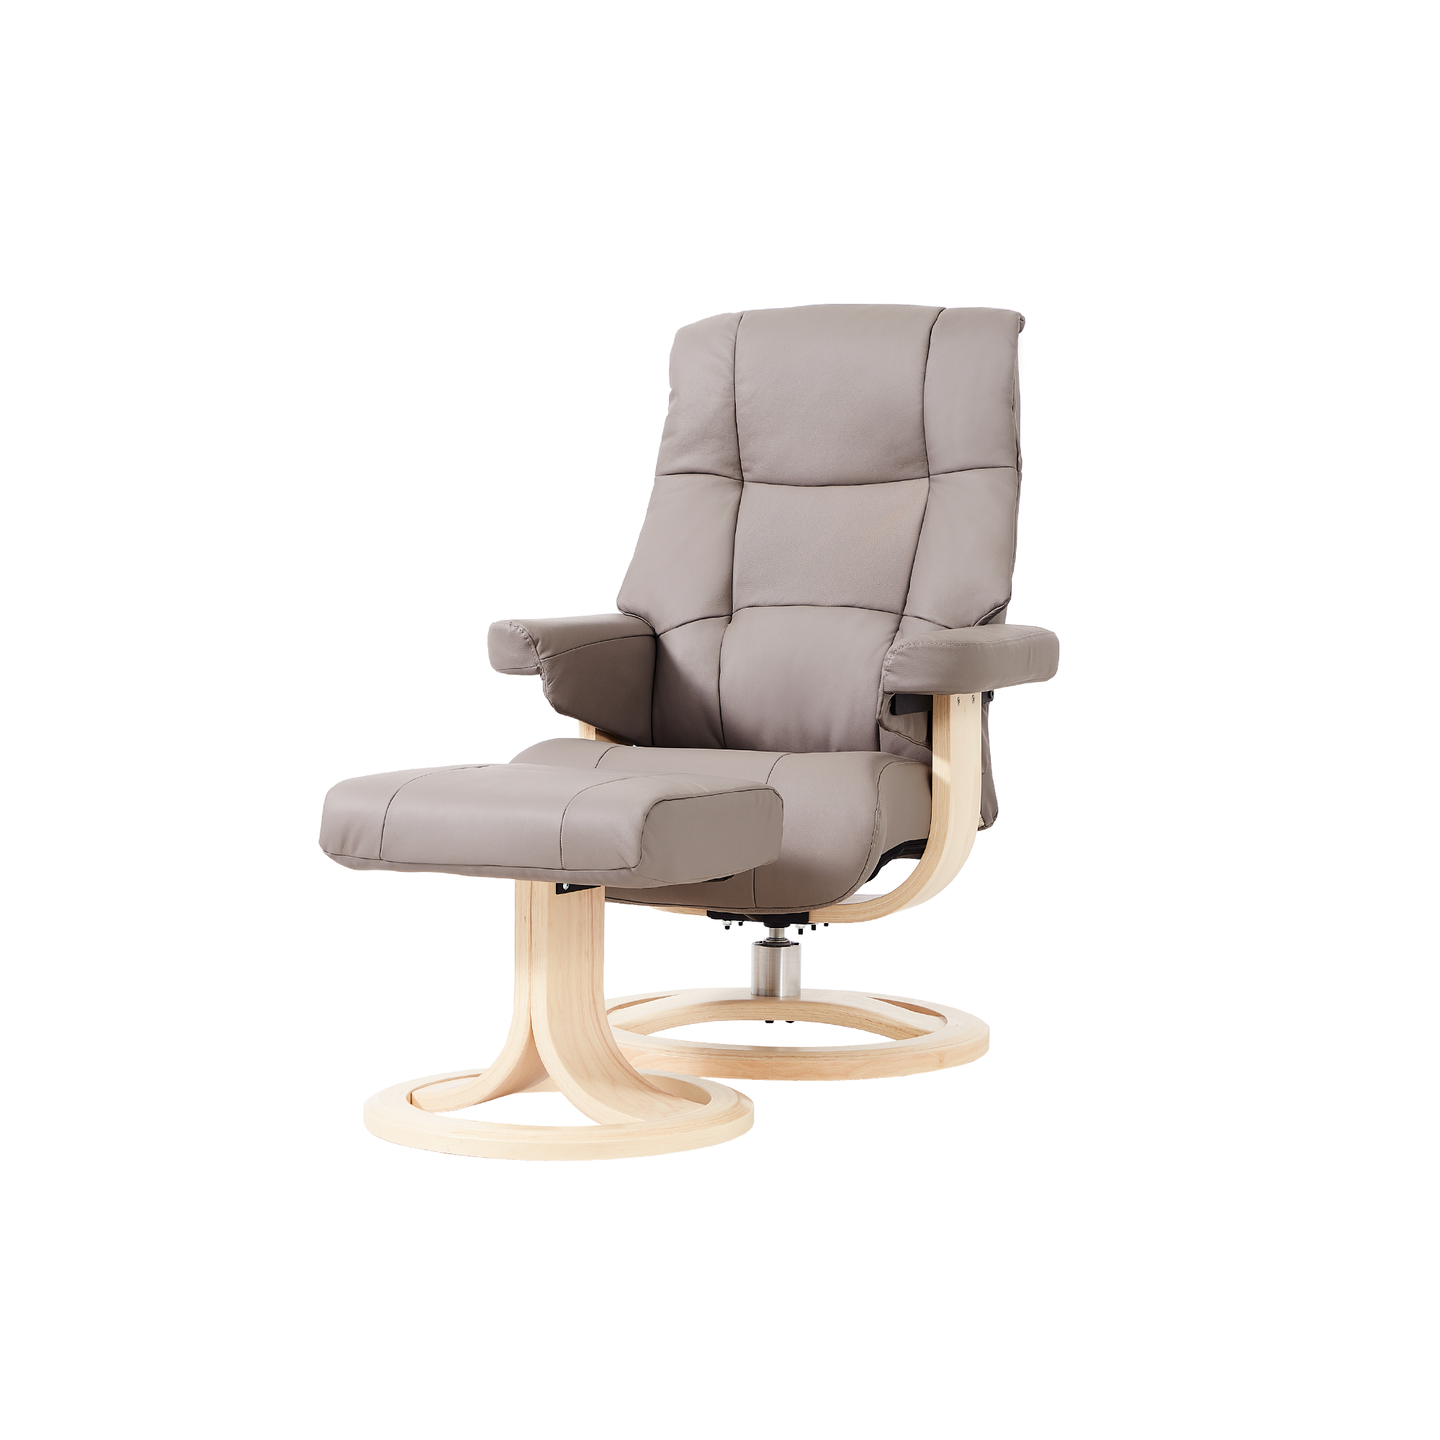 This recliner boasts a luxuriously comfortable seat and back cushion, complemented by its rounded backrest which adapts to your body to ensure exceptional support. Boasting a sleek design and slim fit, this ergonomic leather lounge chair is ideal for bedrooms, living rooms, and all other interior spaces. Oslo lounge chair is designed with 360-degree swivel function and matching footstool, with a selection of four genuine bovine leather colors available for you to choose from.